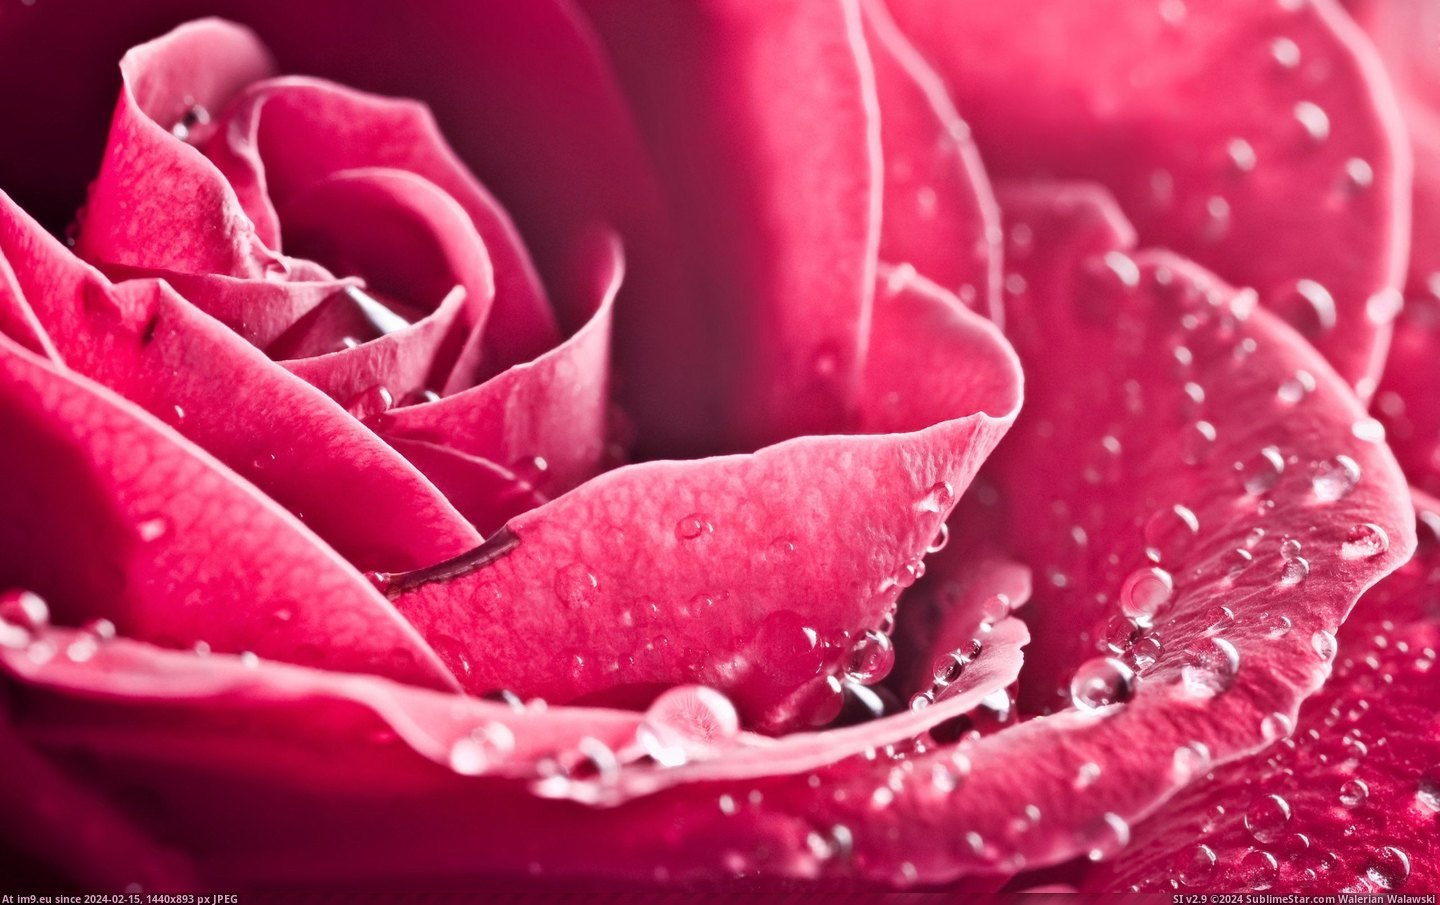 #Wallpaper #Rose #Special #Wide Special Rose Wide HD Wallpaper Pic. (Image of album Unique HD Wallpapers))